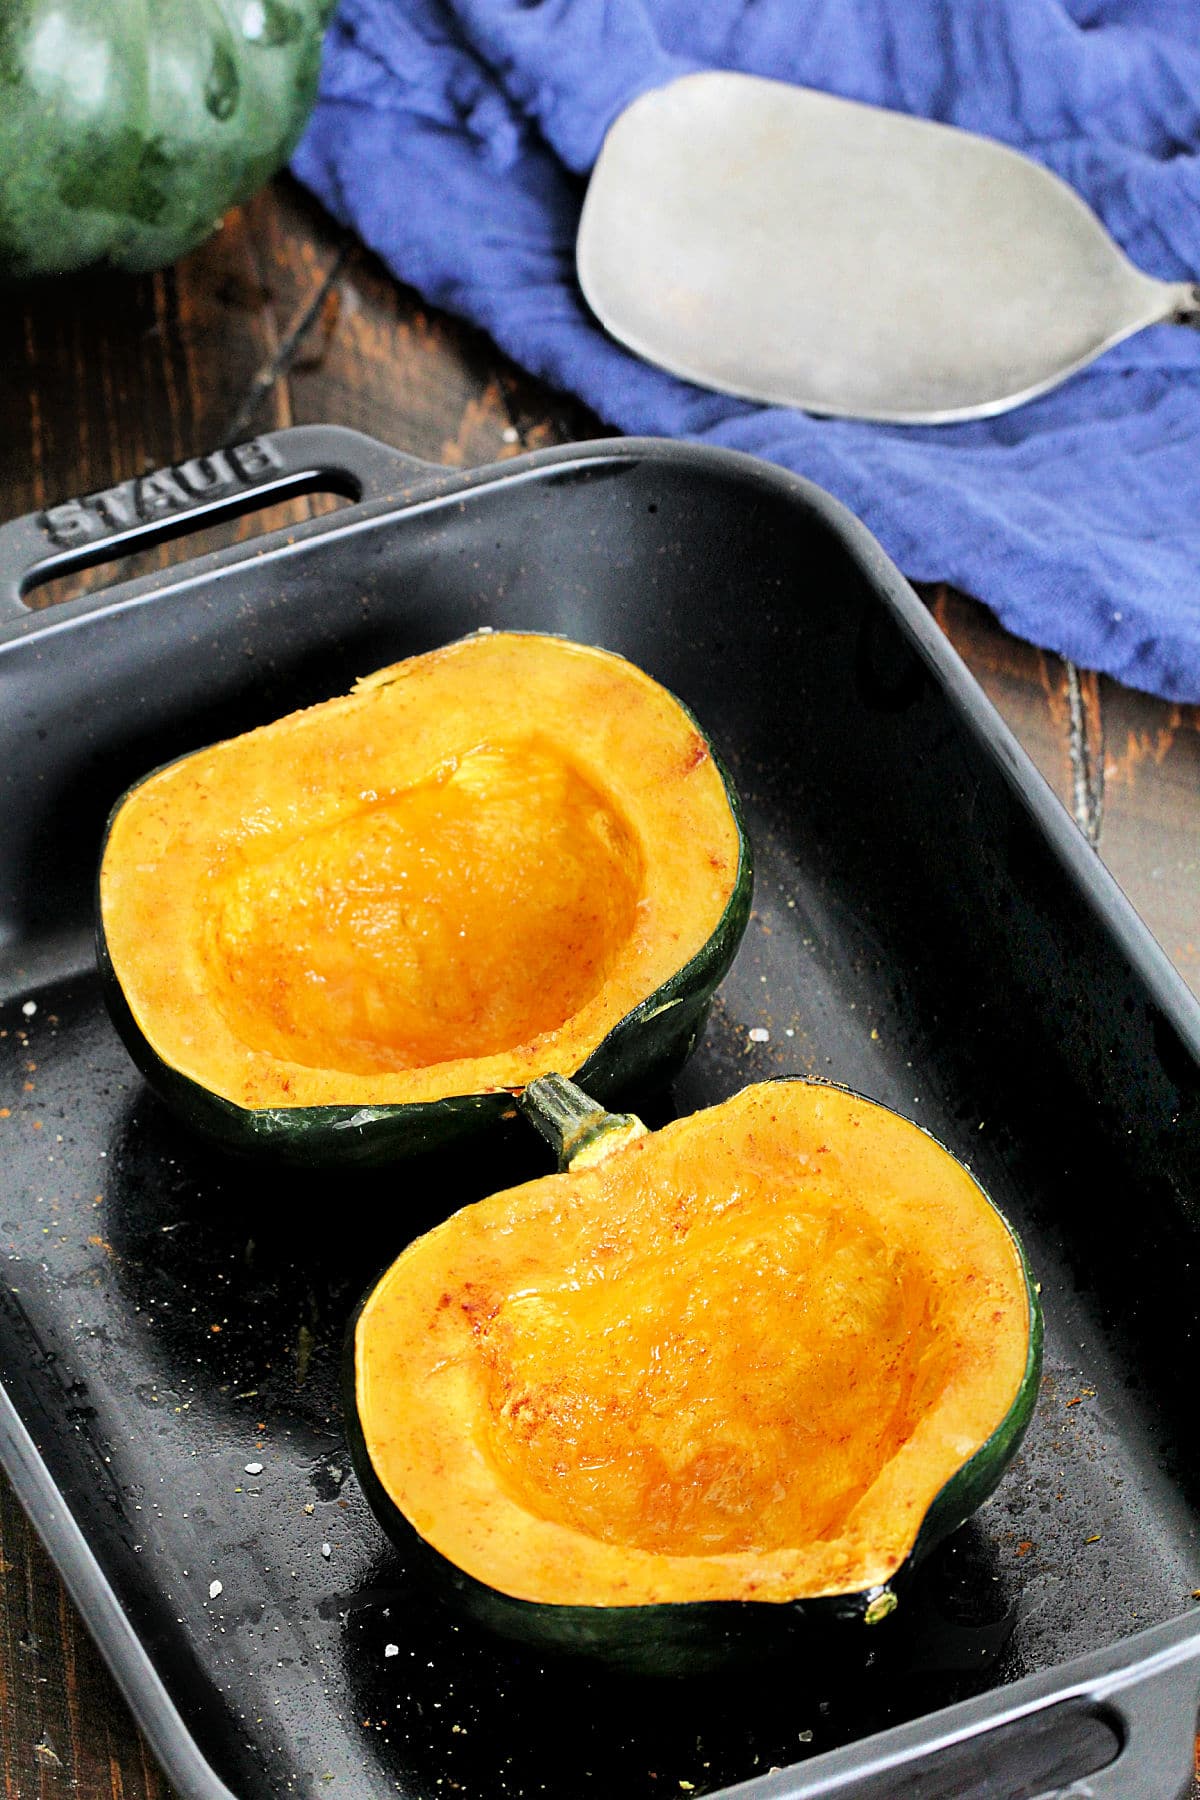 Microwaved acorn squash in a black baking dish with a blue napkin and metal serving spoon nearby.